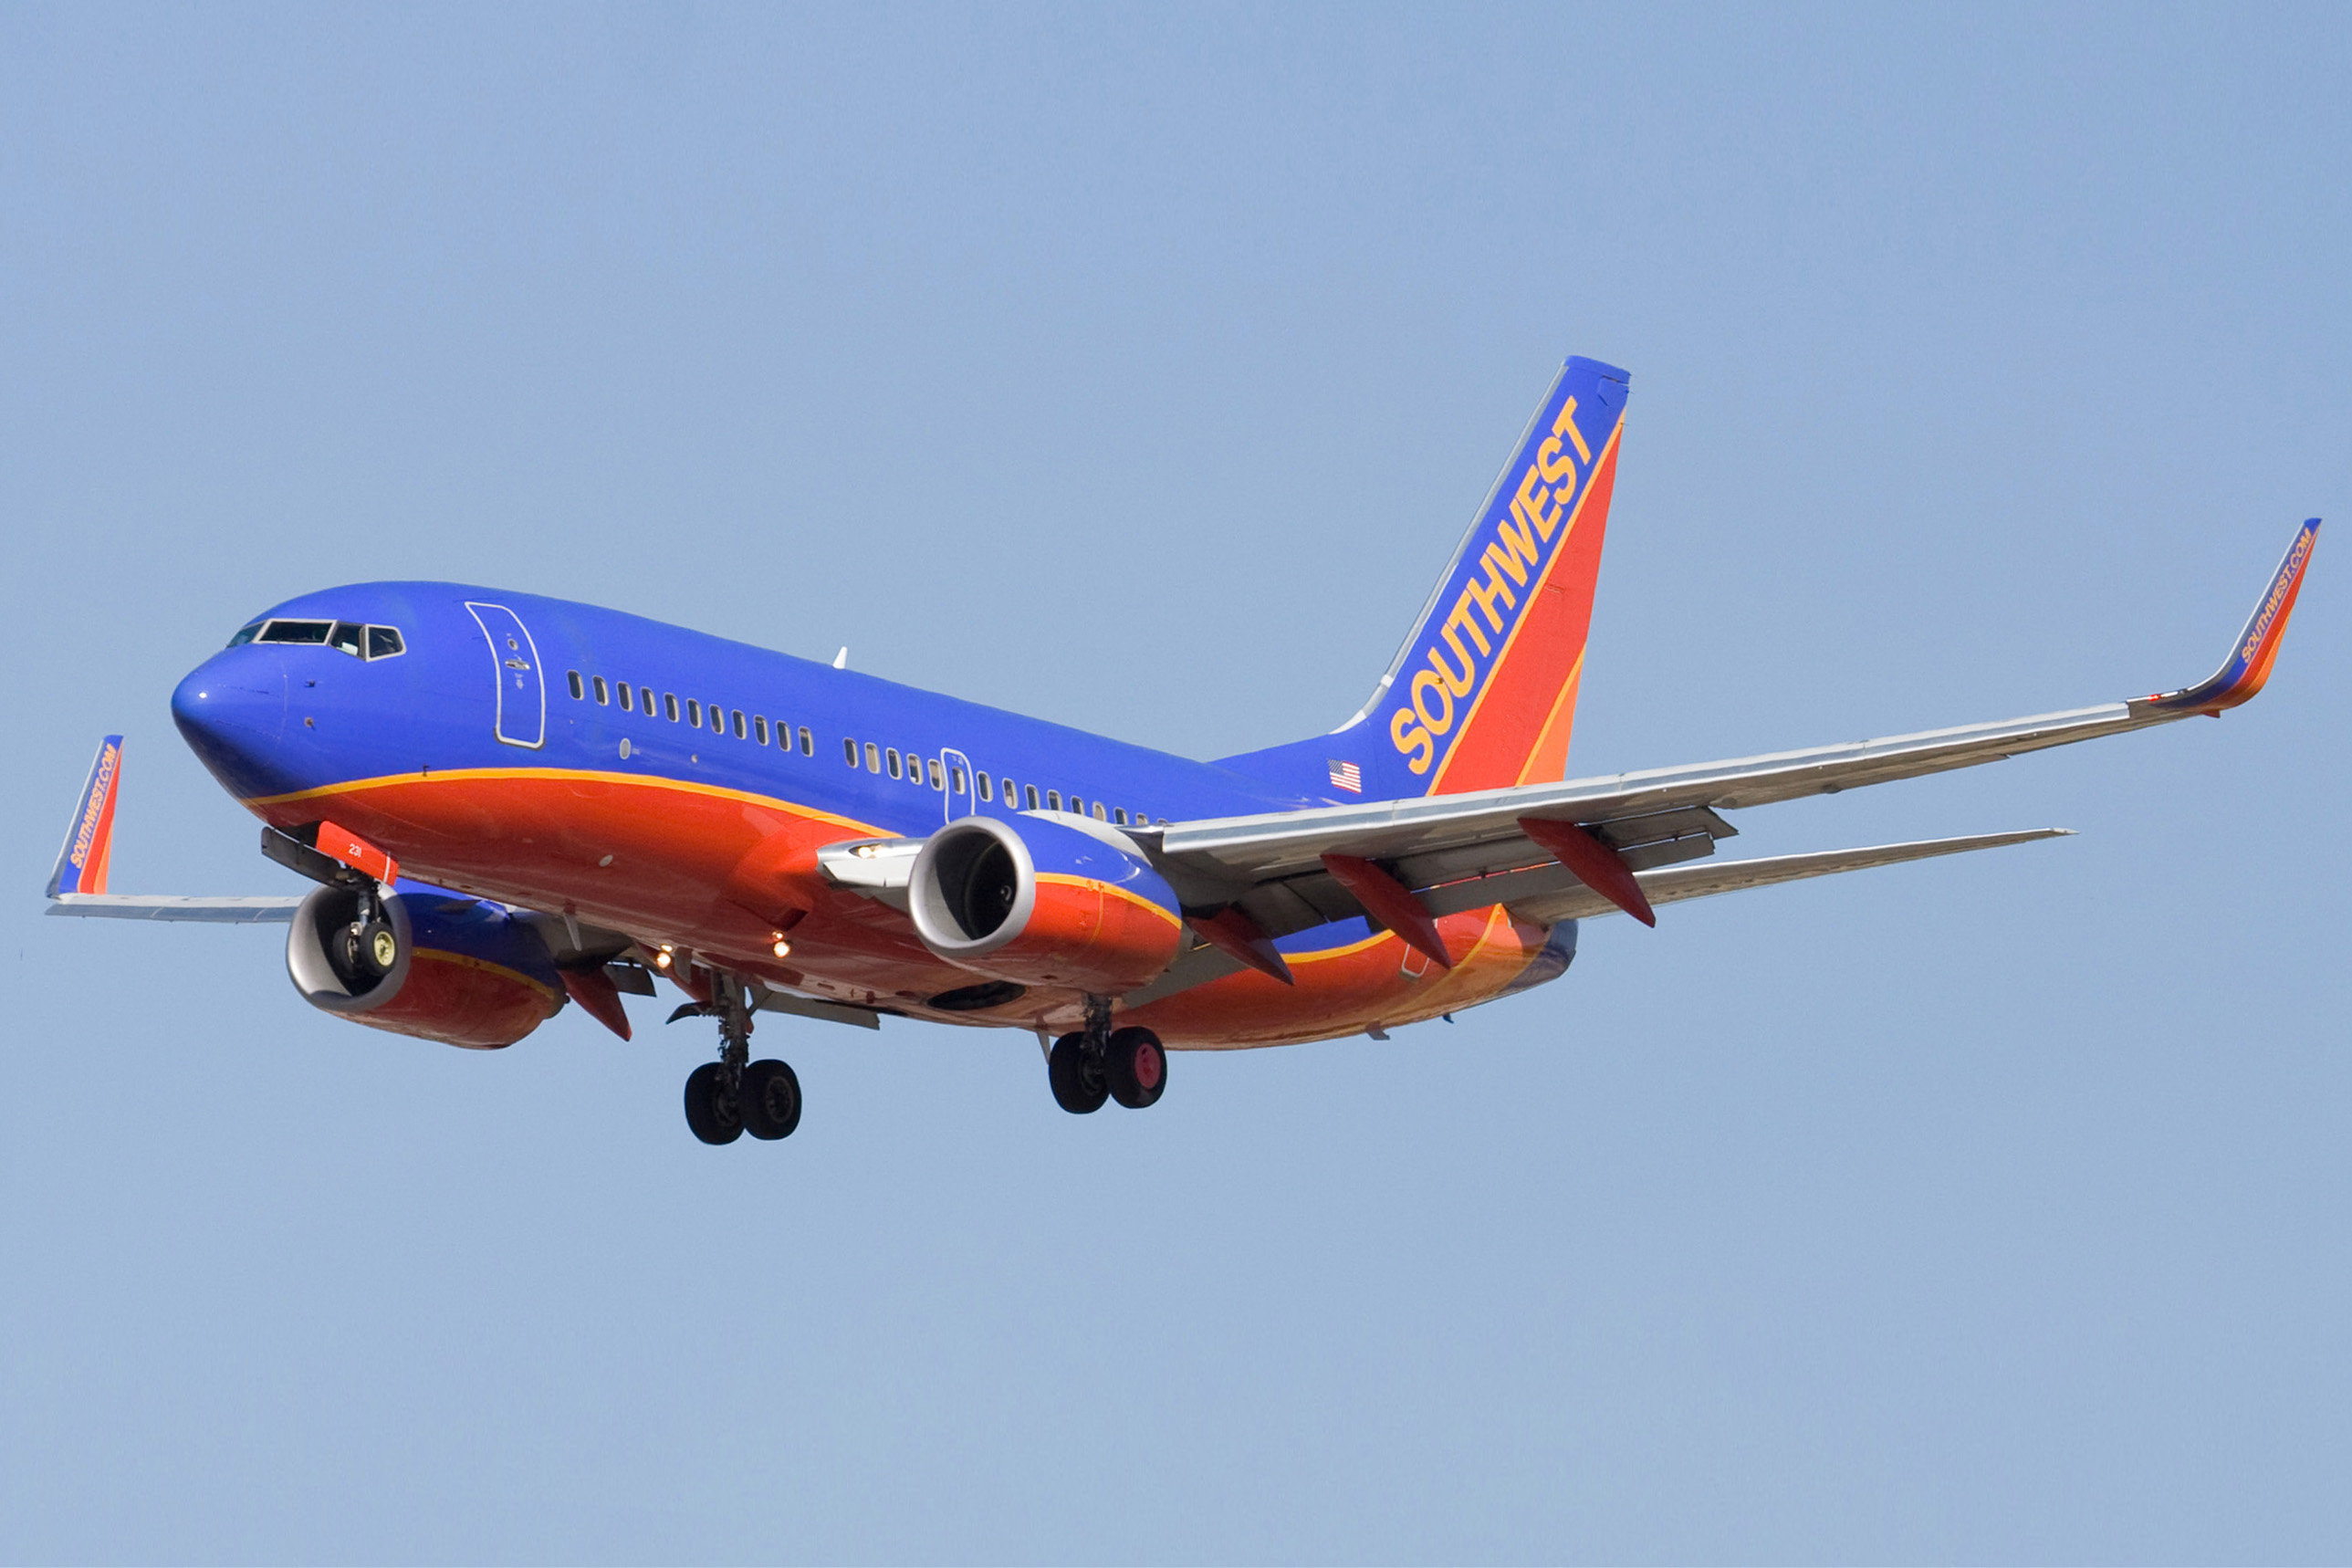 Free drinks on all Southwest flights today